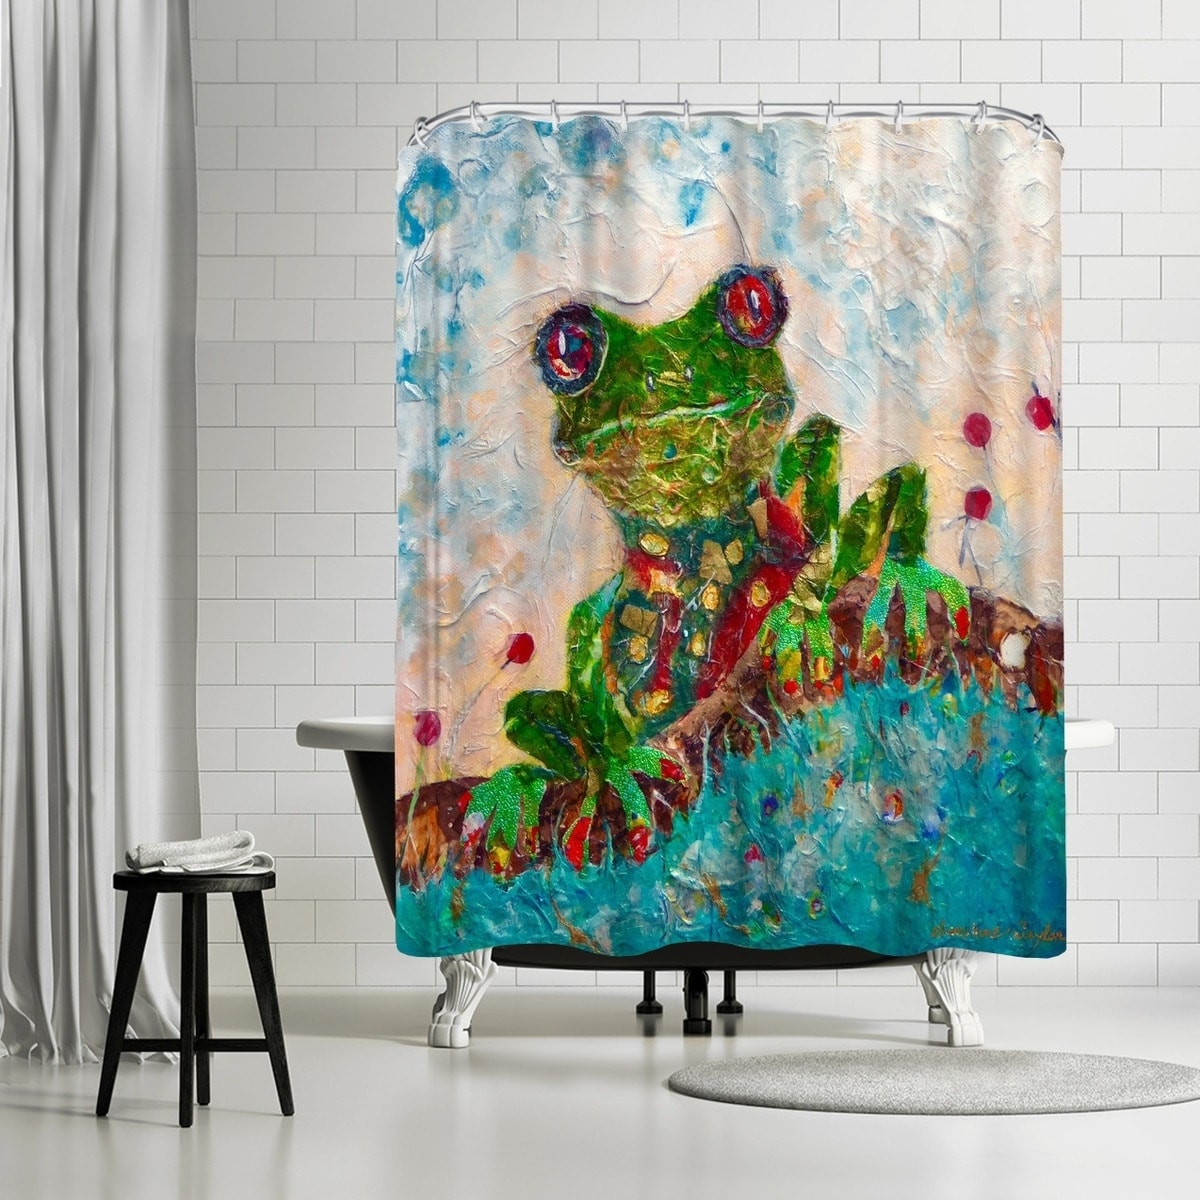 Frog - Shower Curtain - 71 x 74